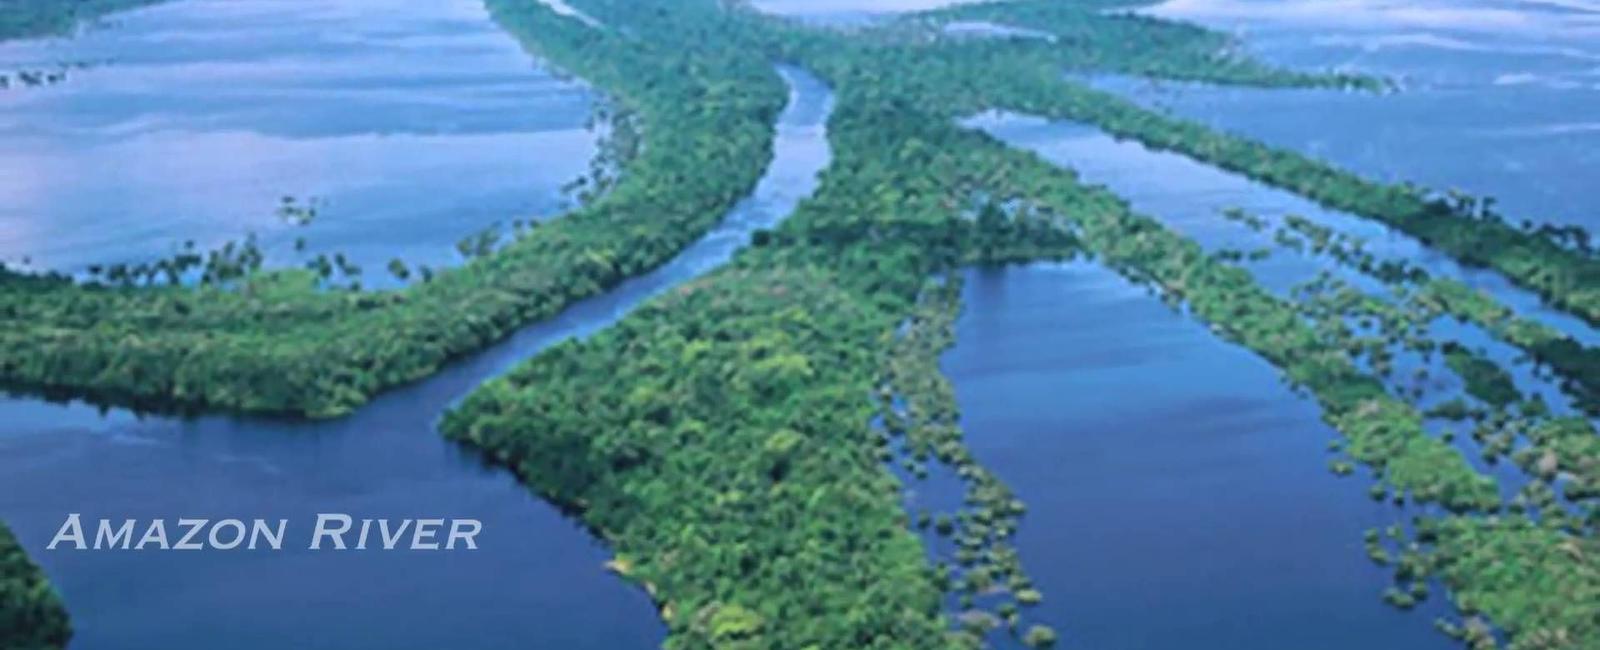 What is the world s longest river amazon